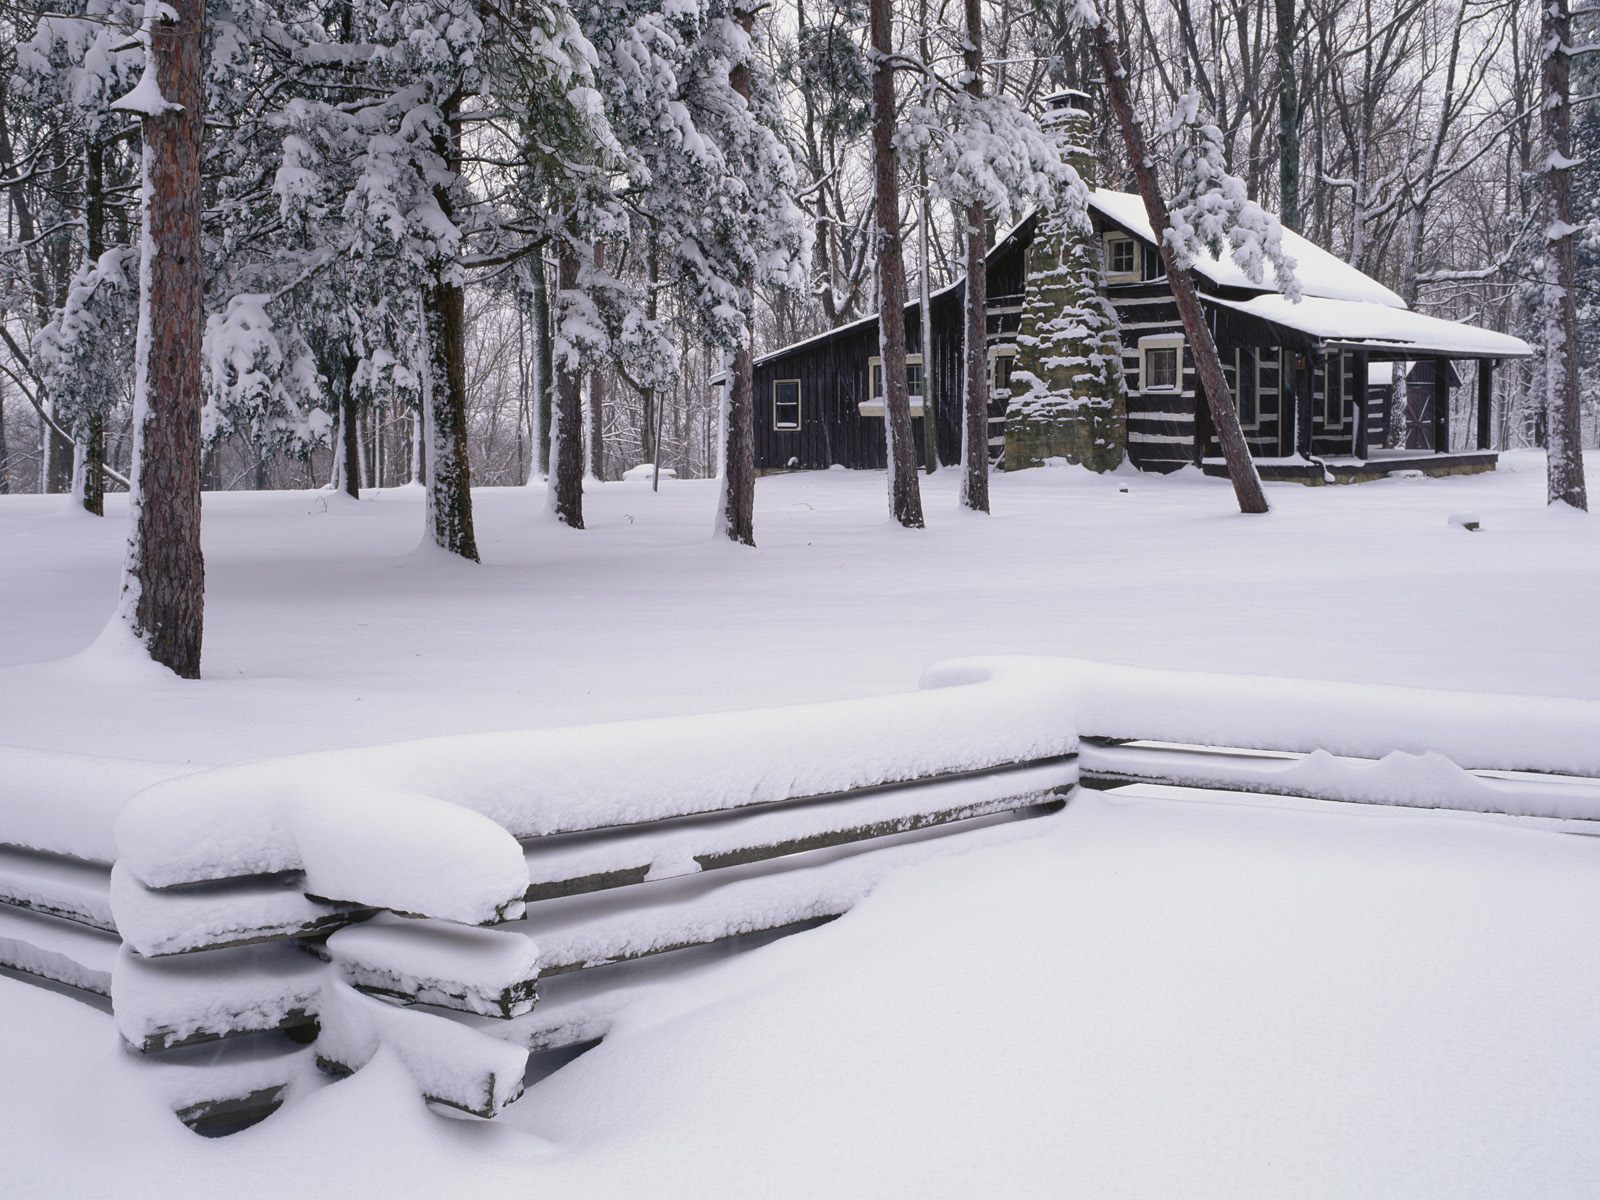 log cabin in the snow Wallpaper Background 38093